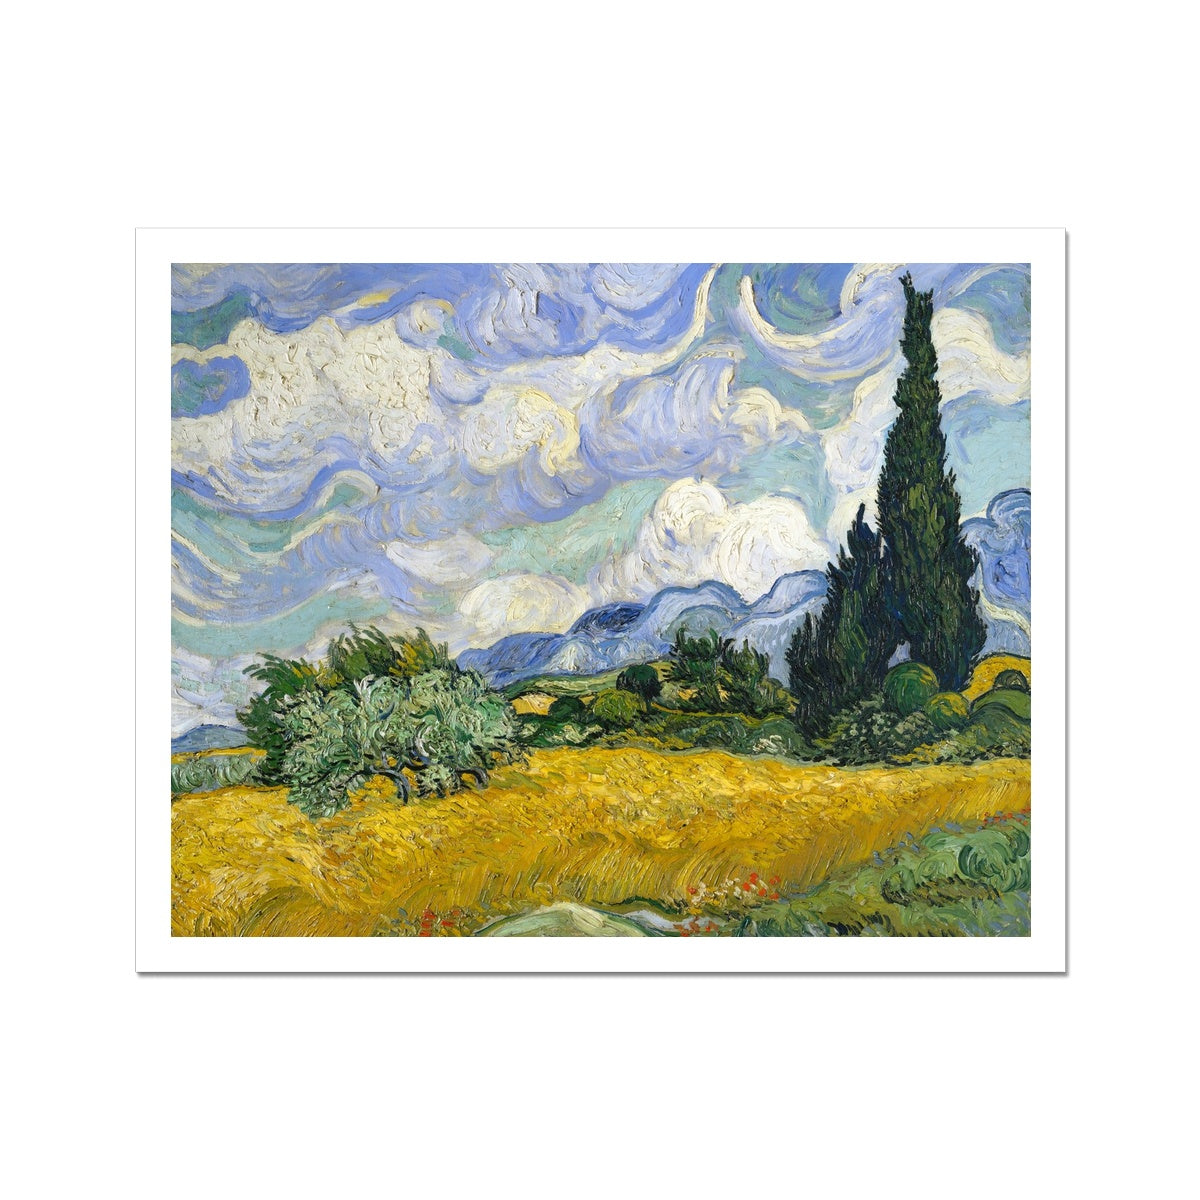 'Wheat Field with Cypresses' by Vincent Van Gogh. Open Edition Fine Art Print. Art Gallery Historic Art